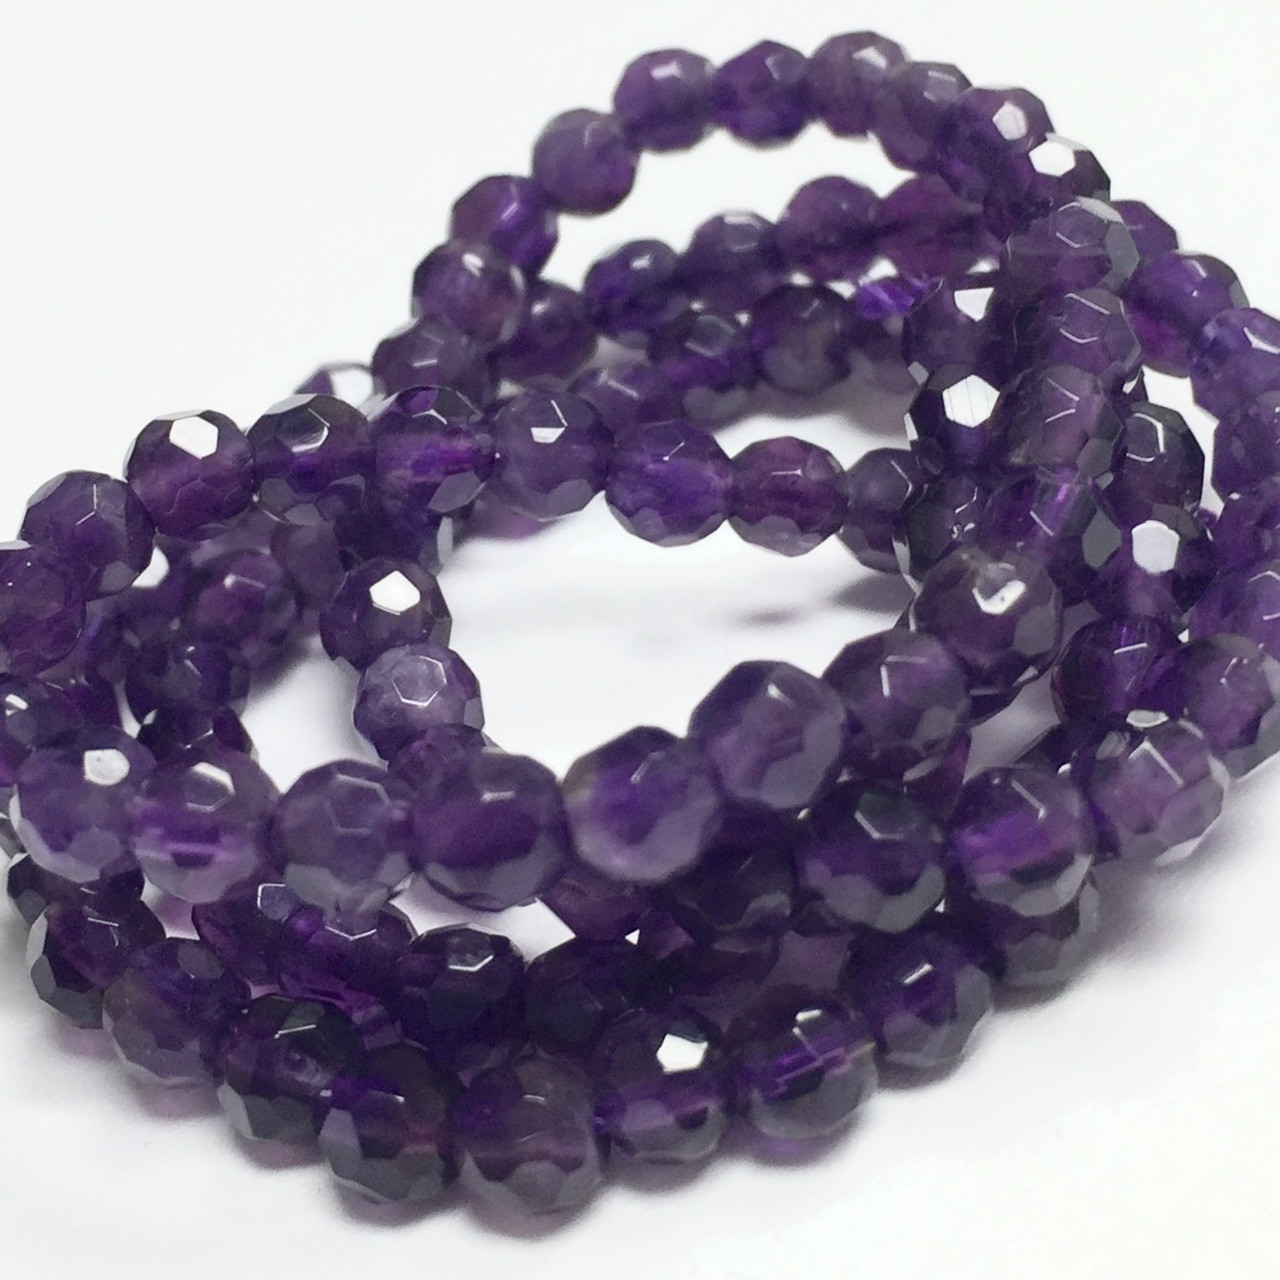 Faceted Amethyst Beads - 4mm Round - A Grain of Sand